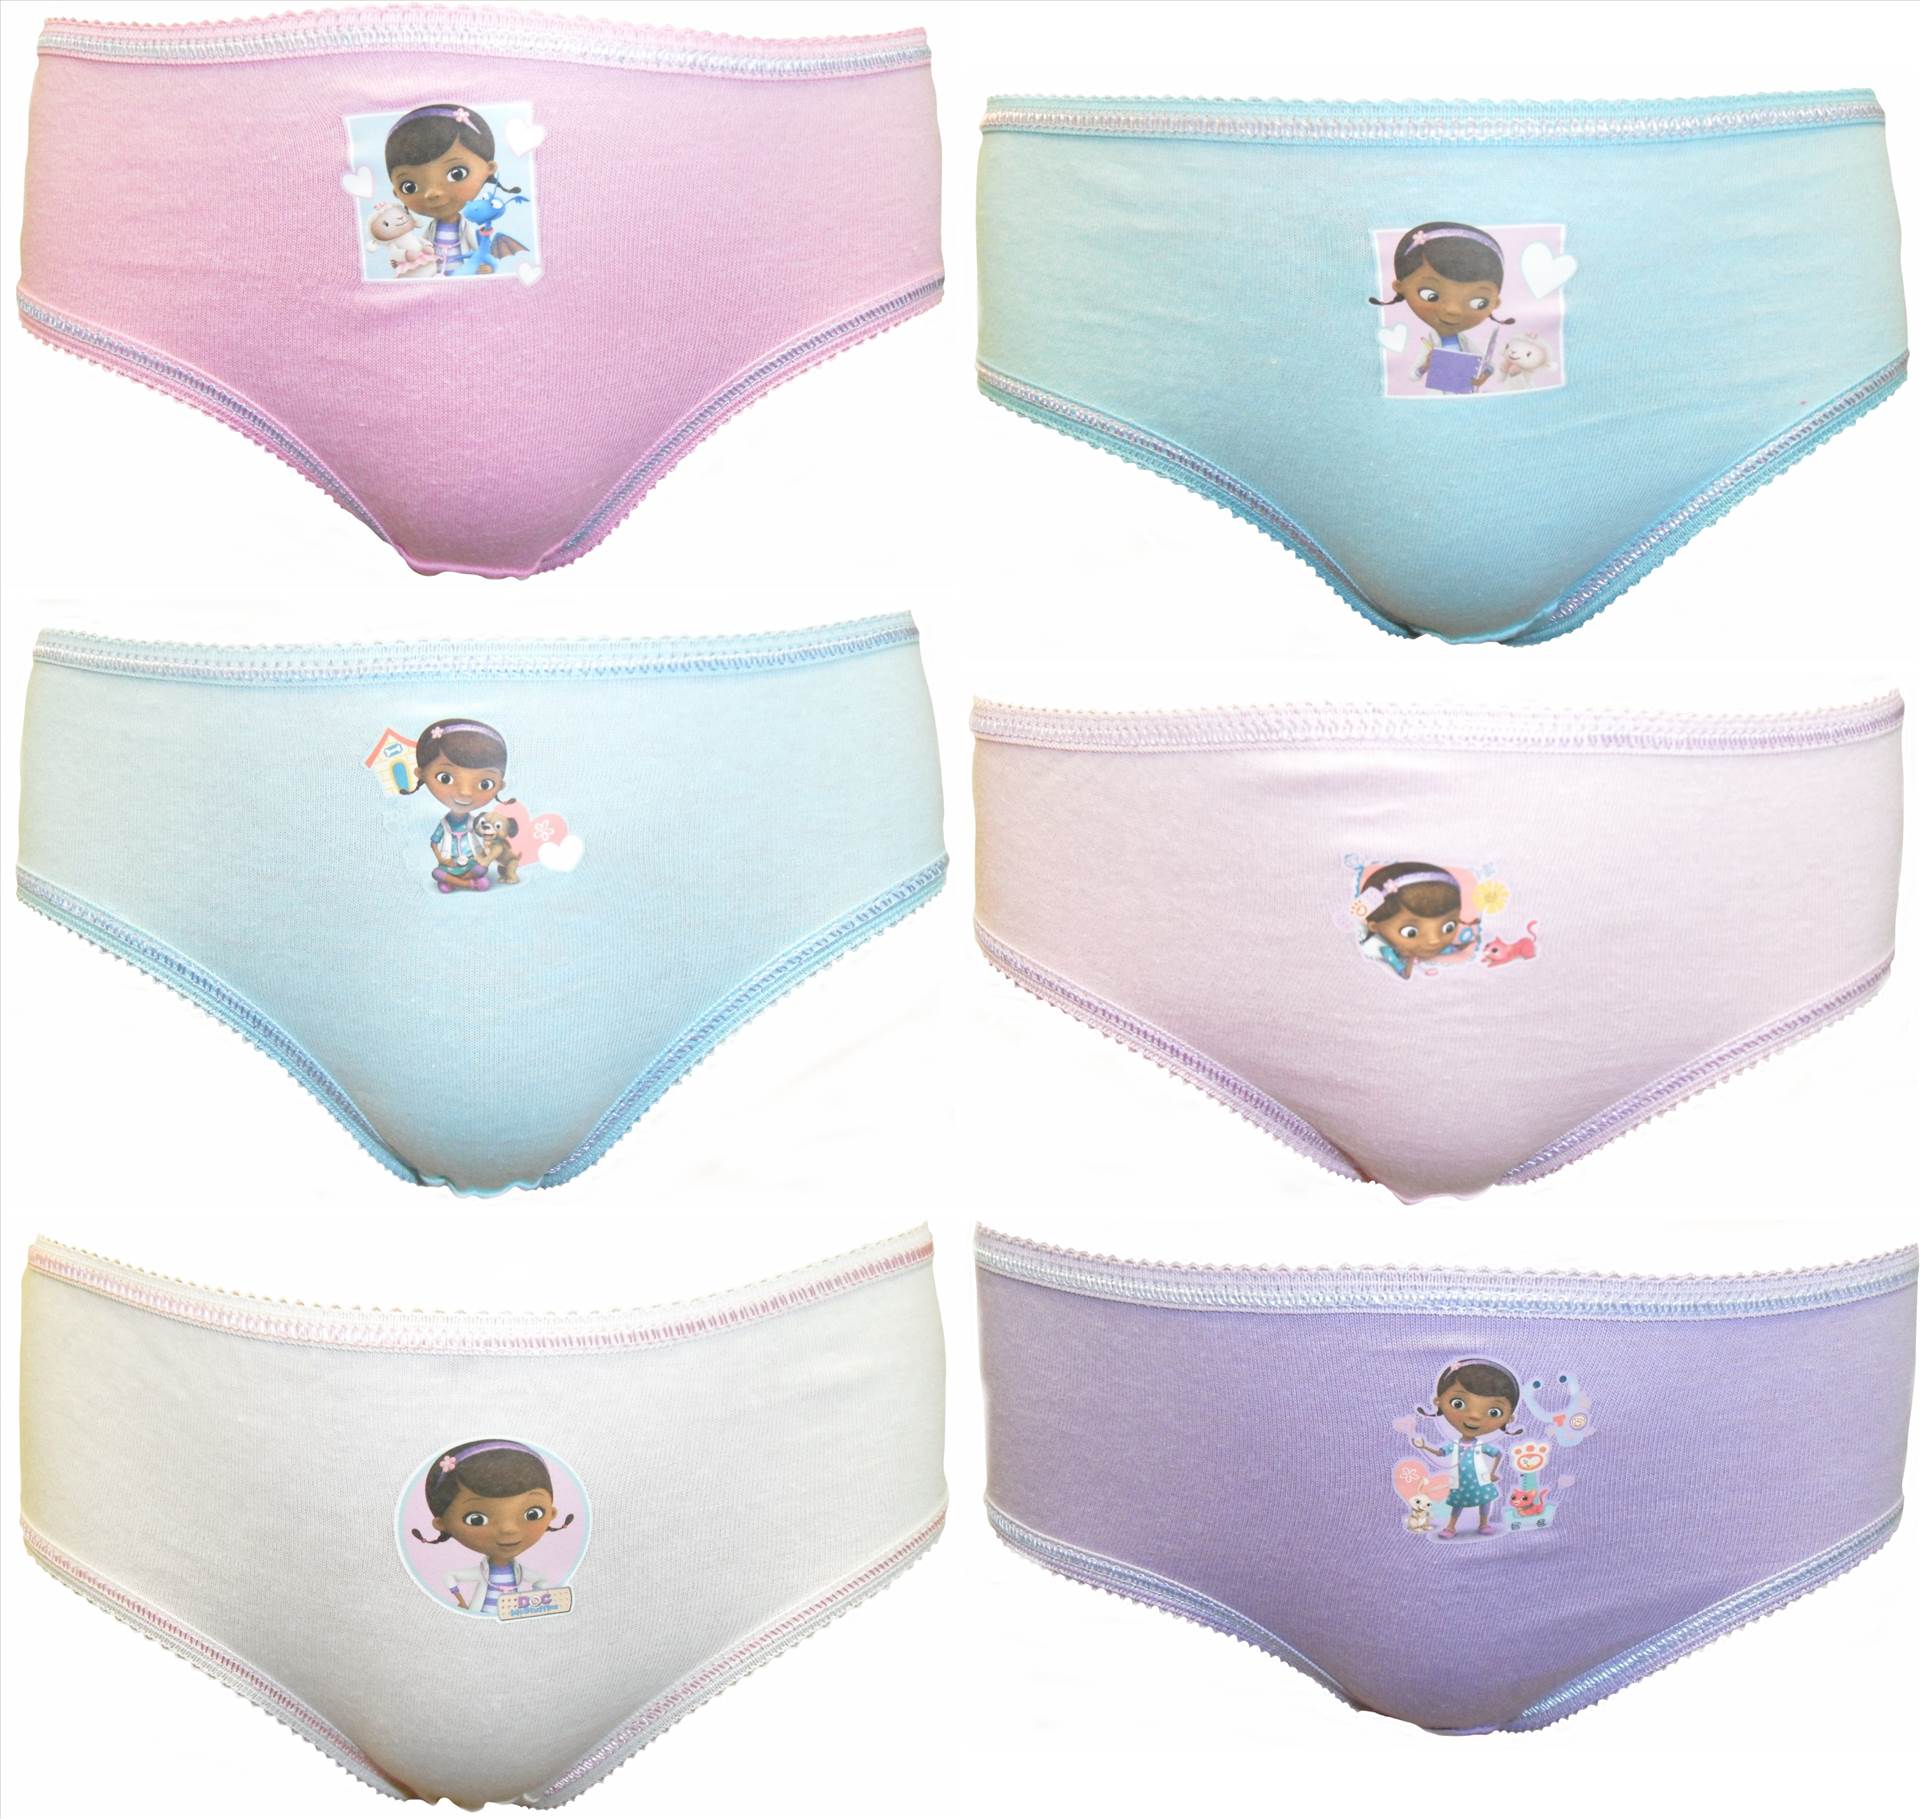 Doc McStuffins Knickers GUW26 a.JPG  by Thingimijigs